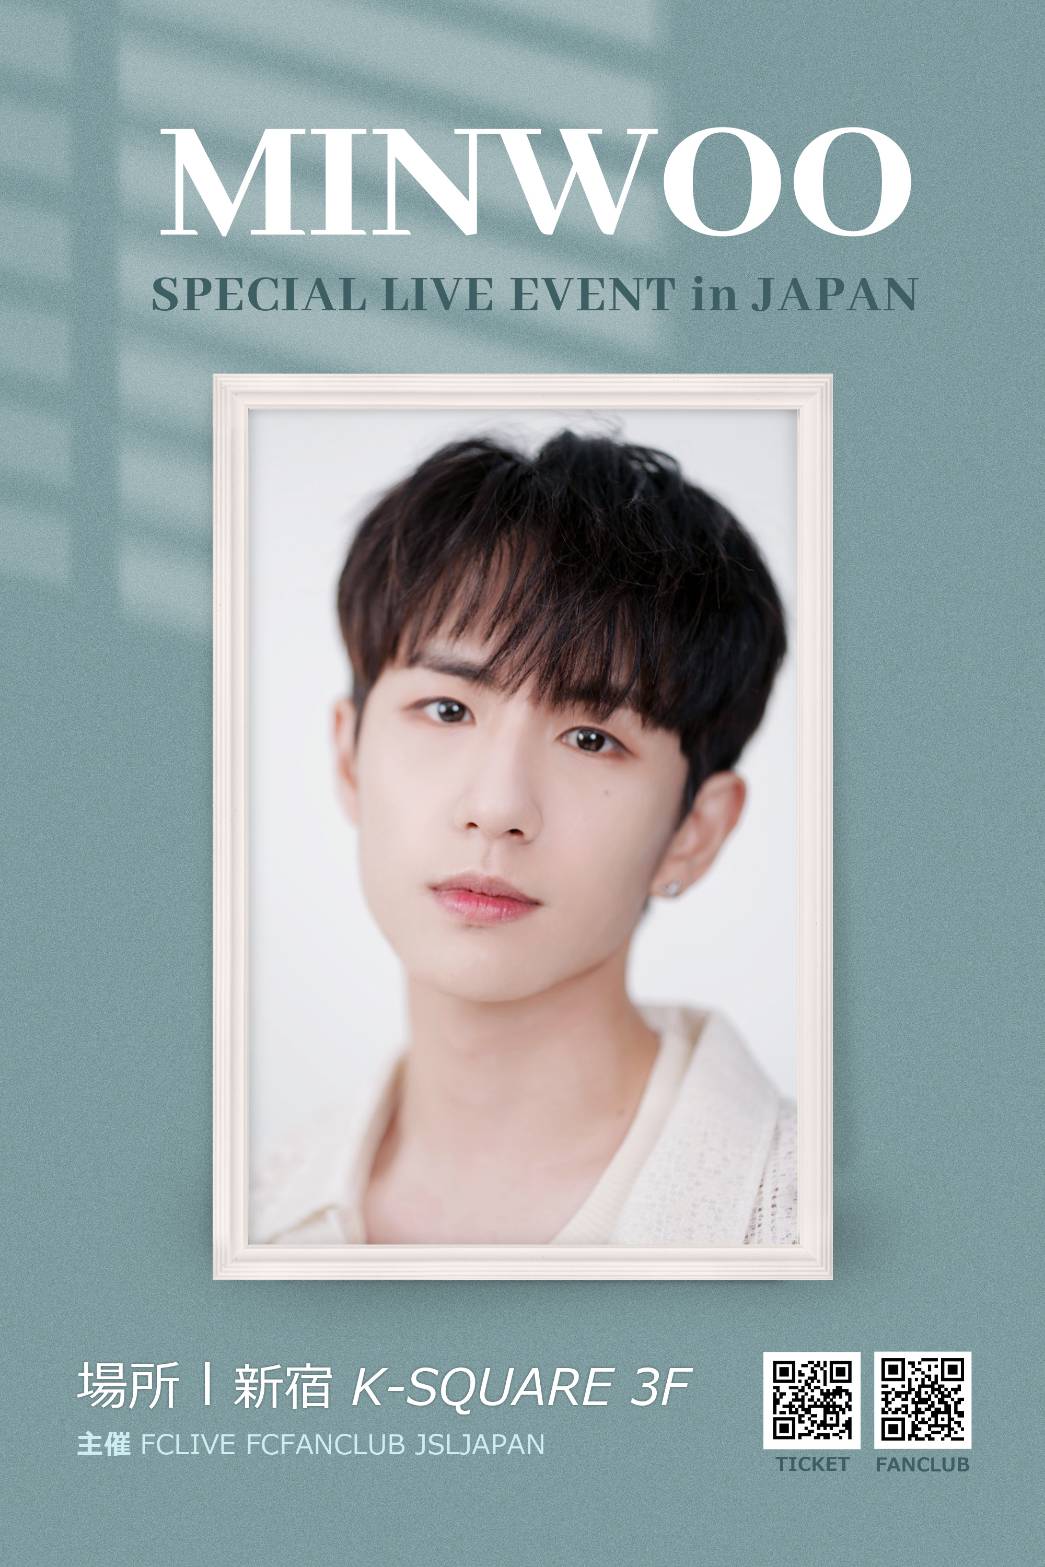 MINWOO SPECIAL LIVE EVENT in JAPAN